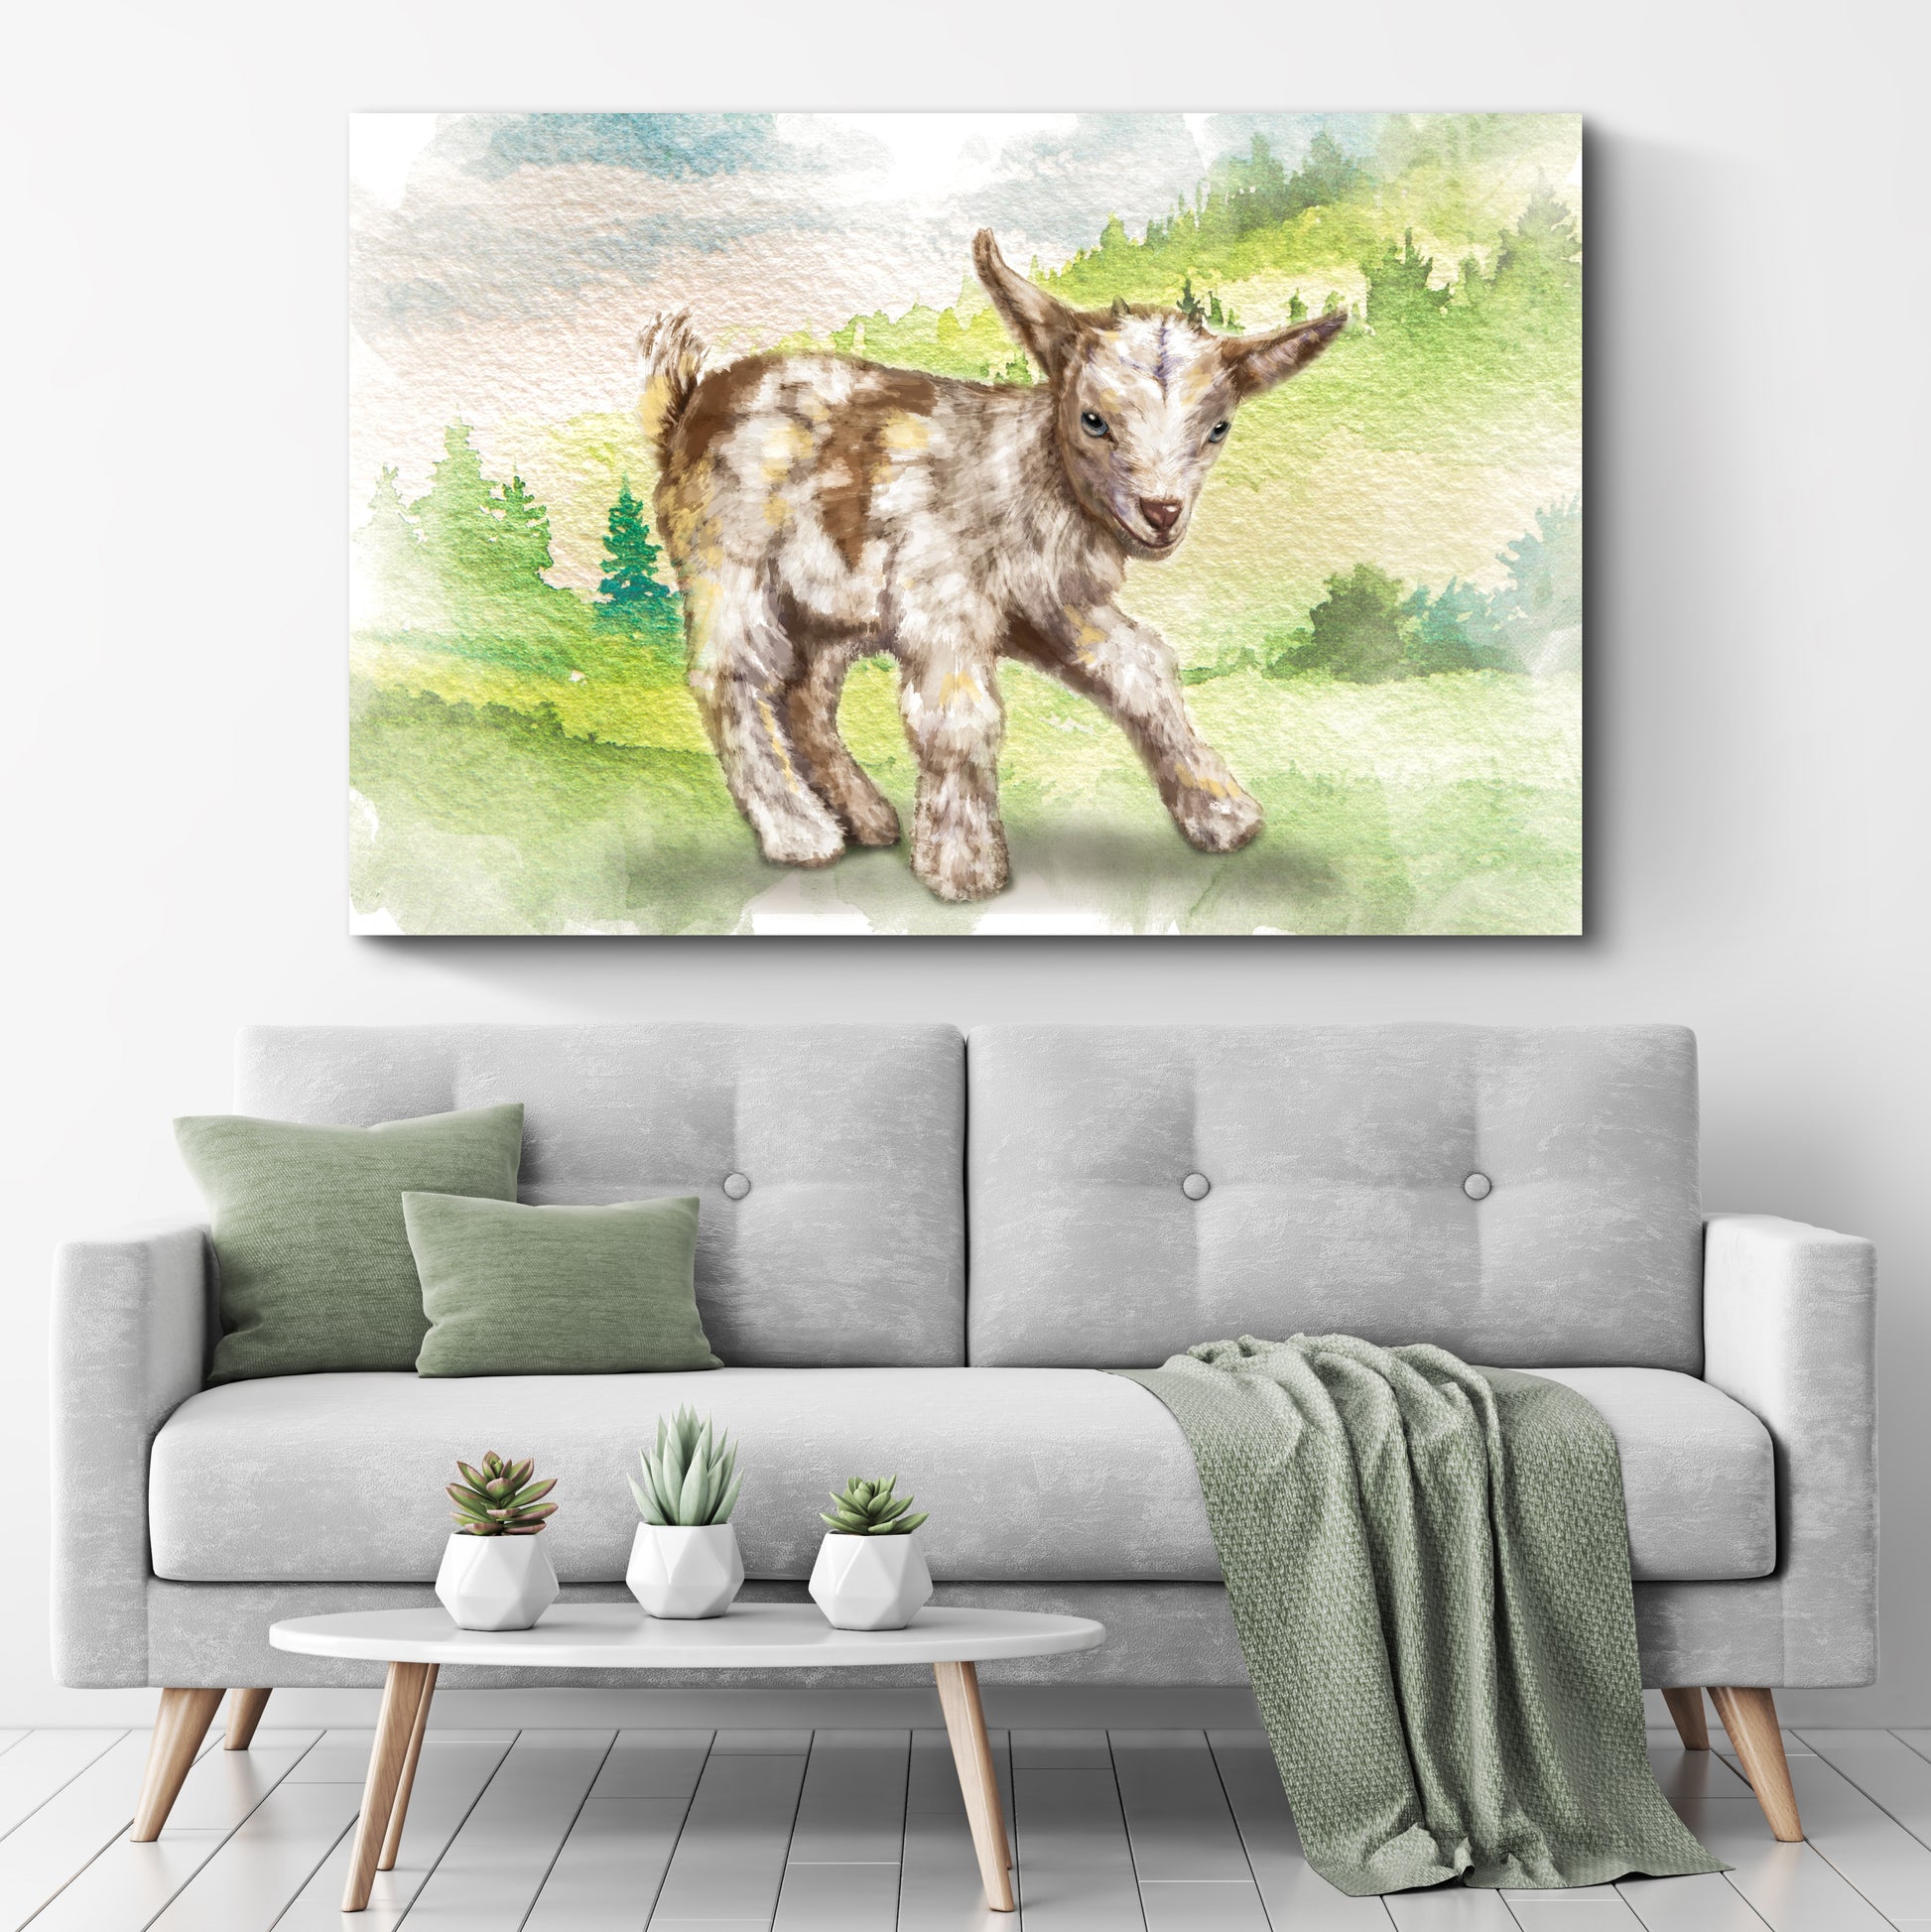 Adorable Baby Goat Canvas Wall Art Style 2 - Image by Tailored Canvases